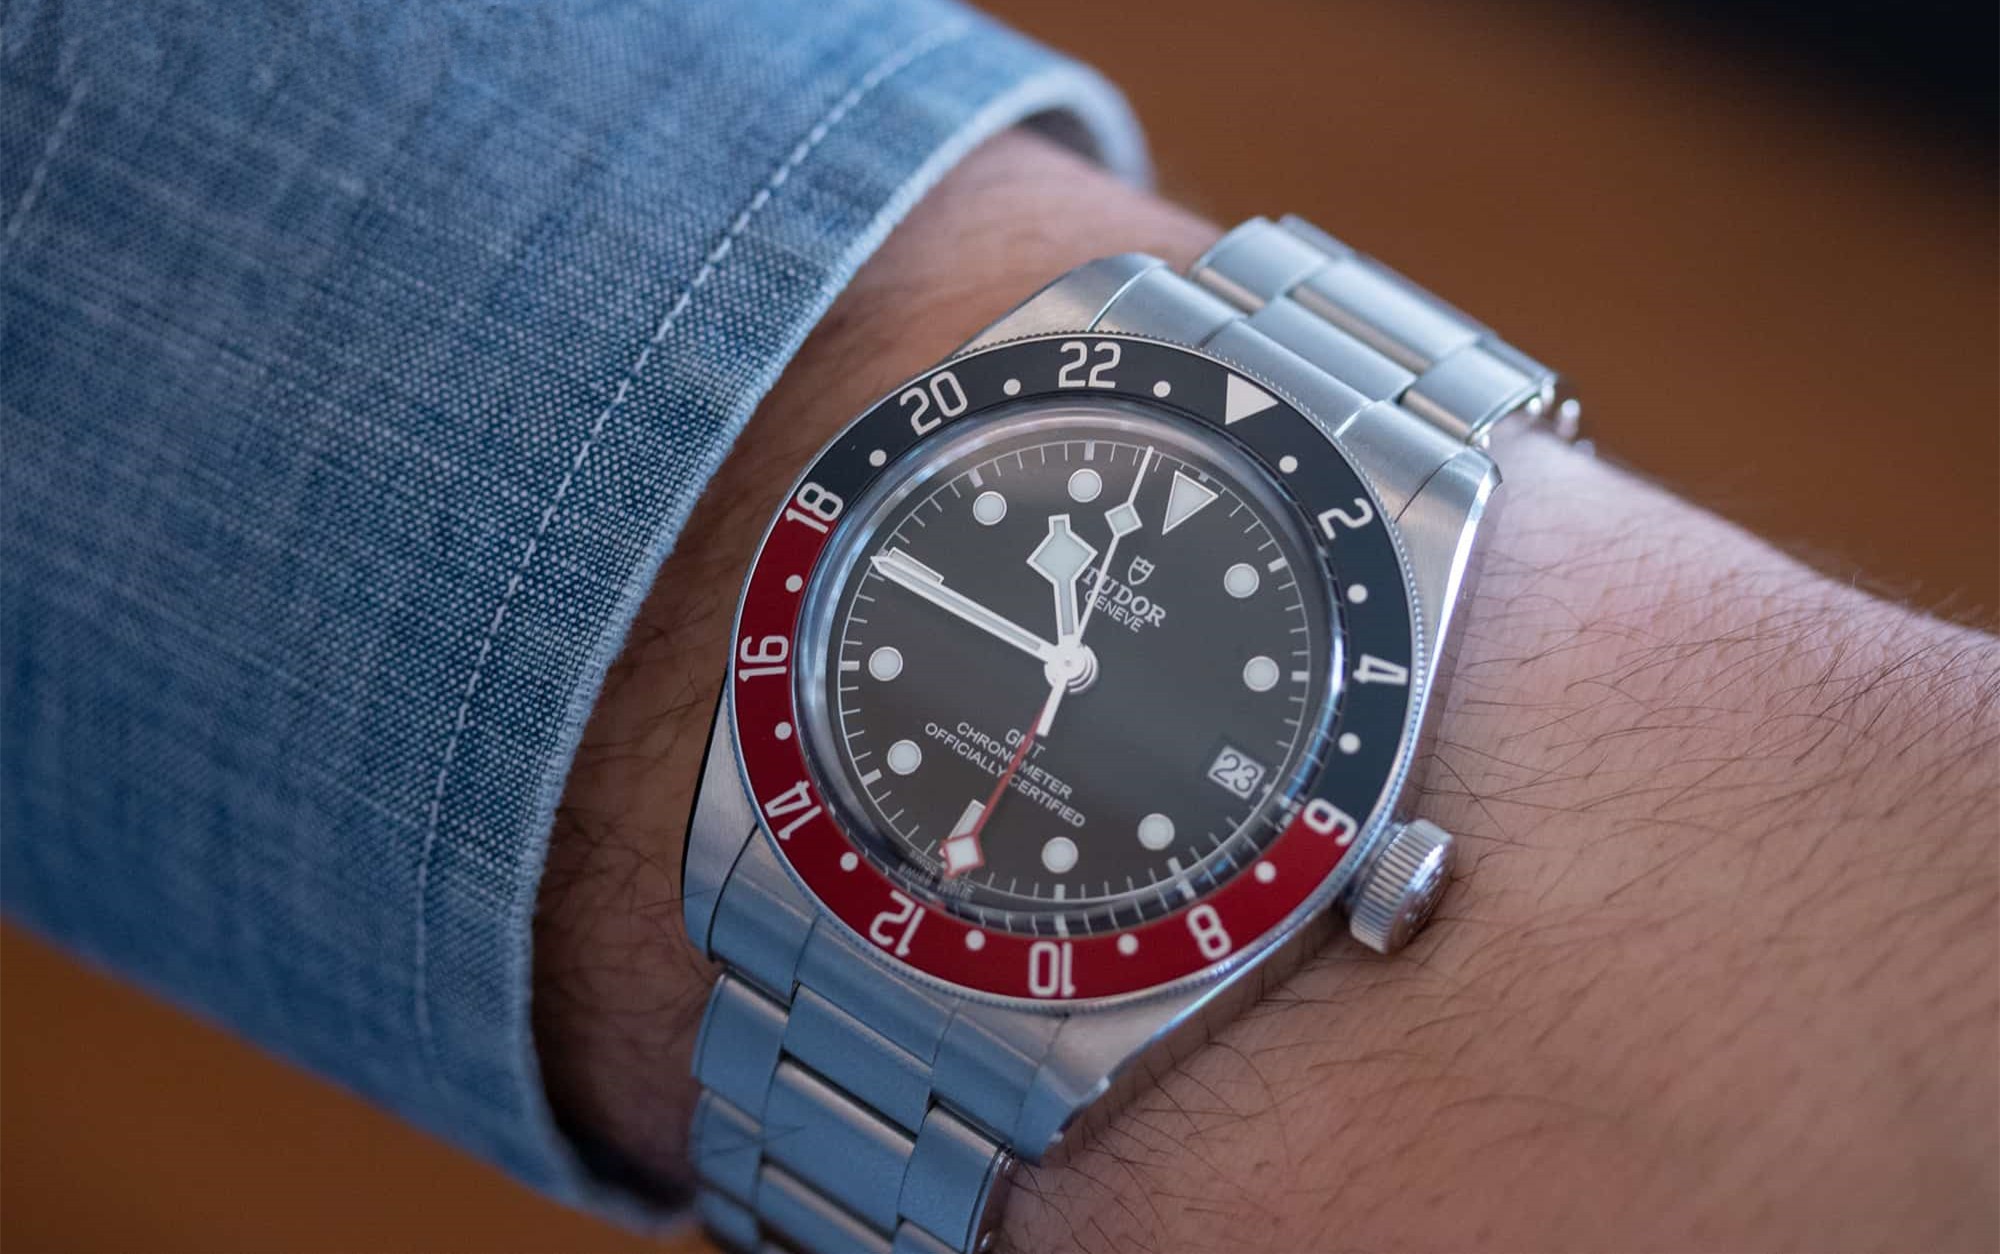 This Tudor has been favored by many watch lovers by its brilliant design and low price.